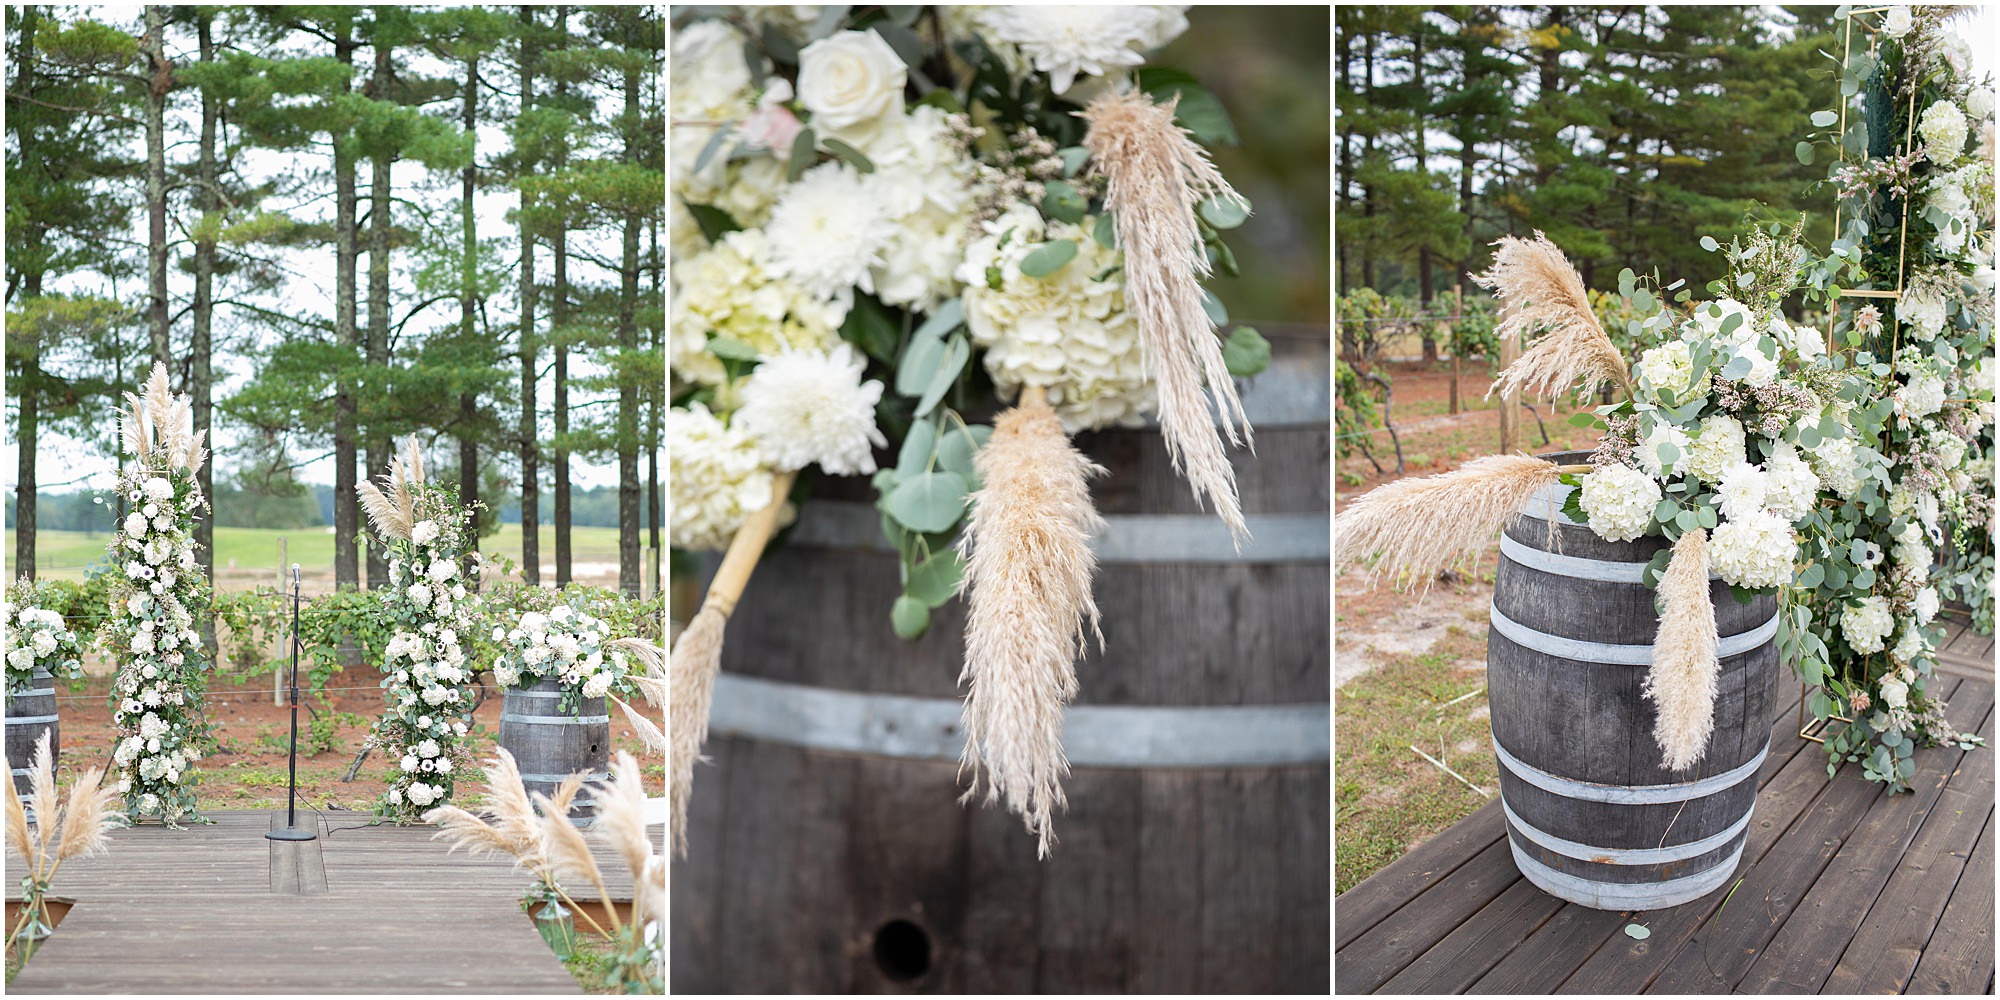 Ceremony details at at Renault Winery in Egg Harbor City, NJ